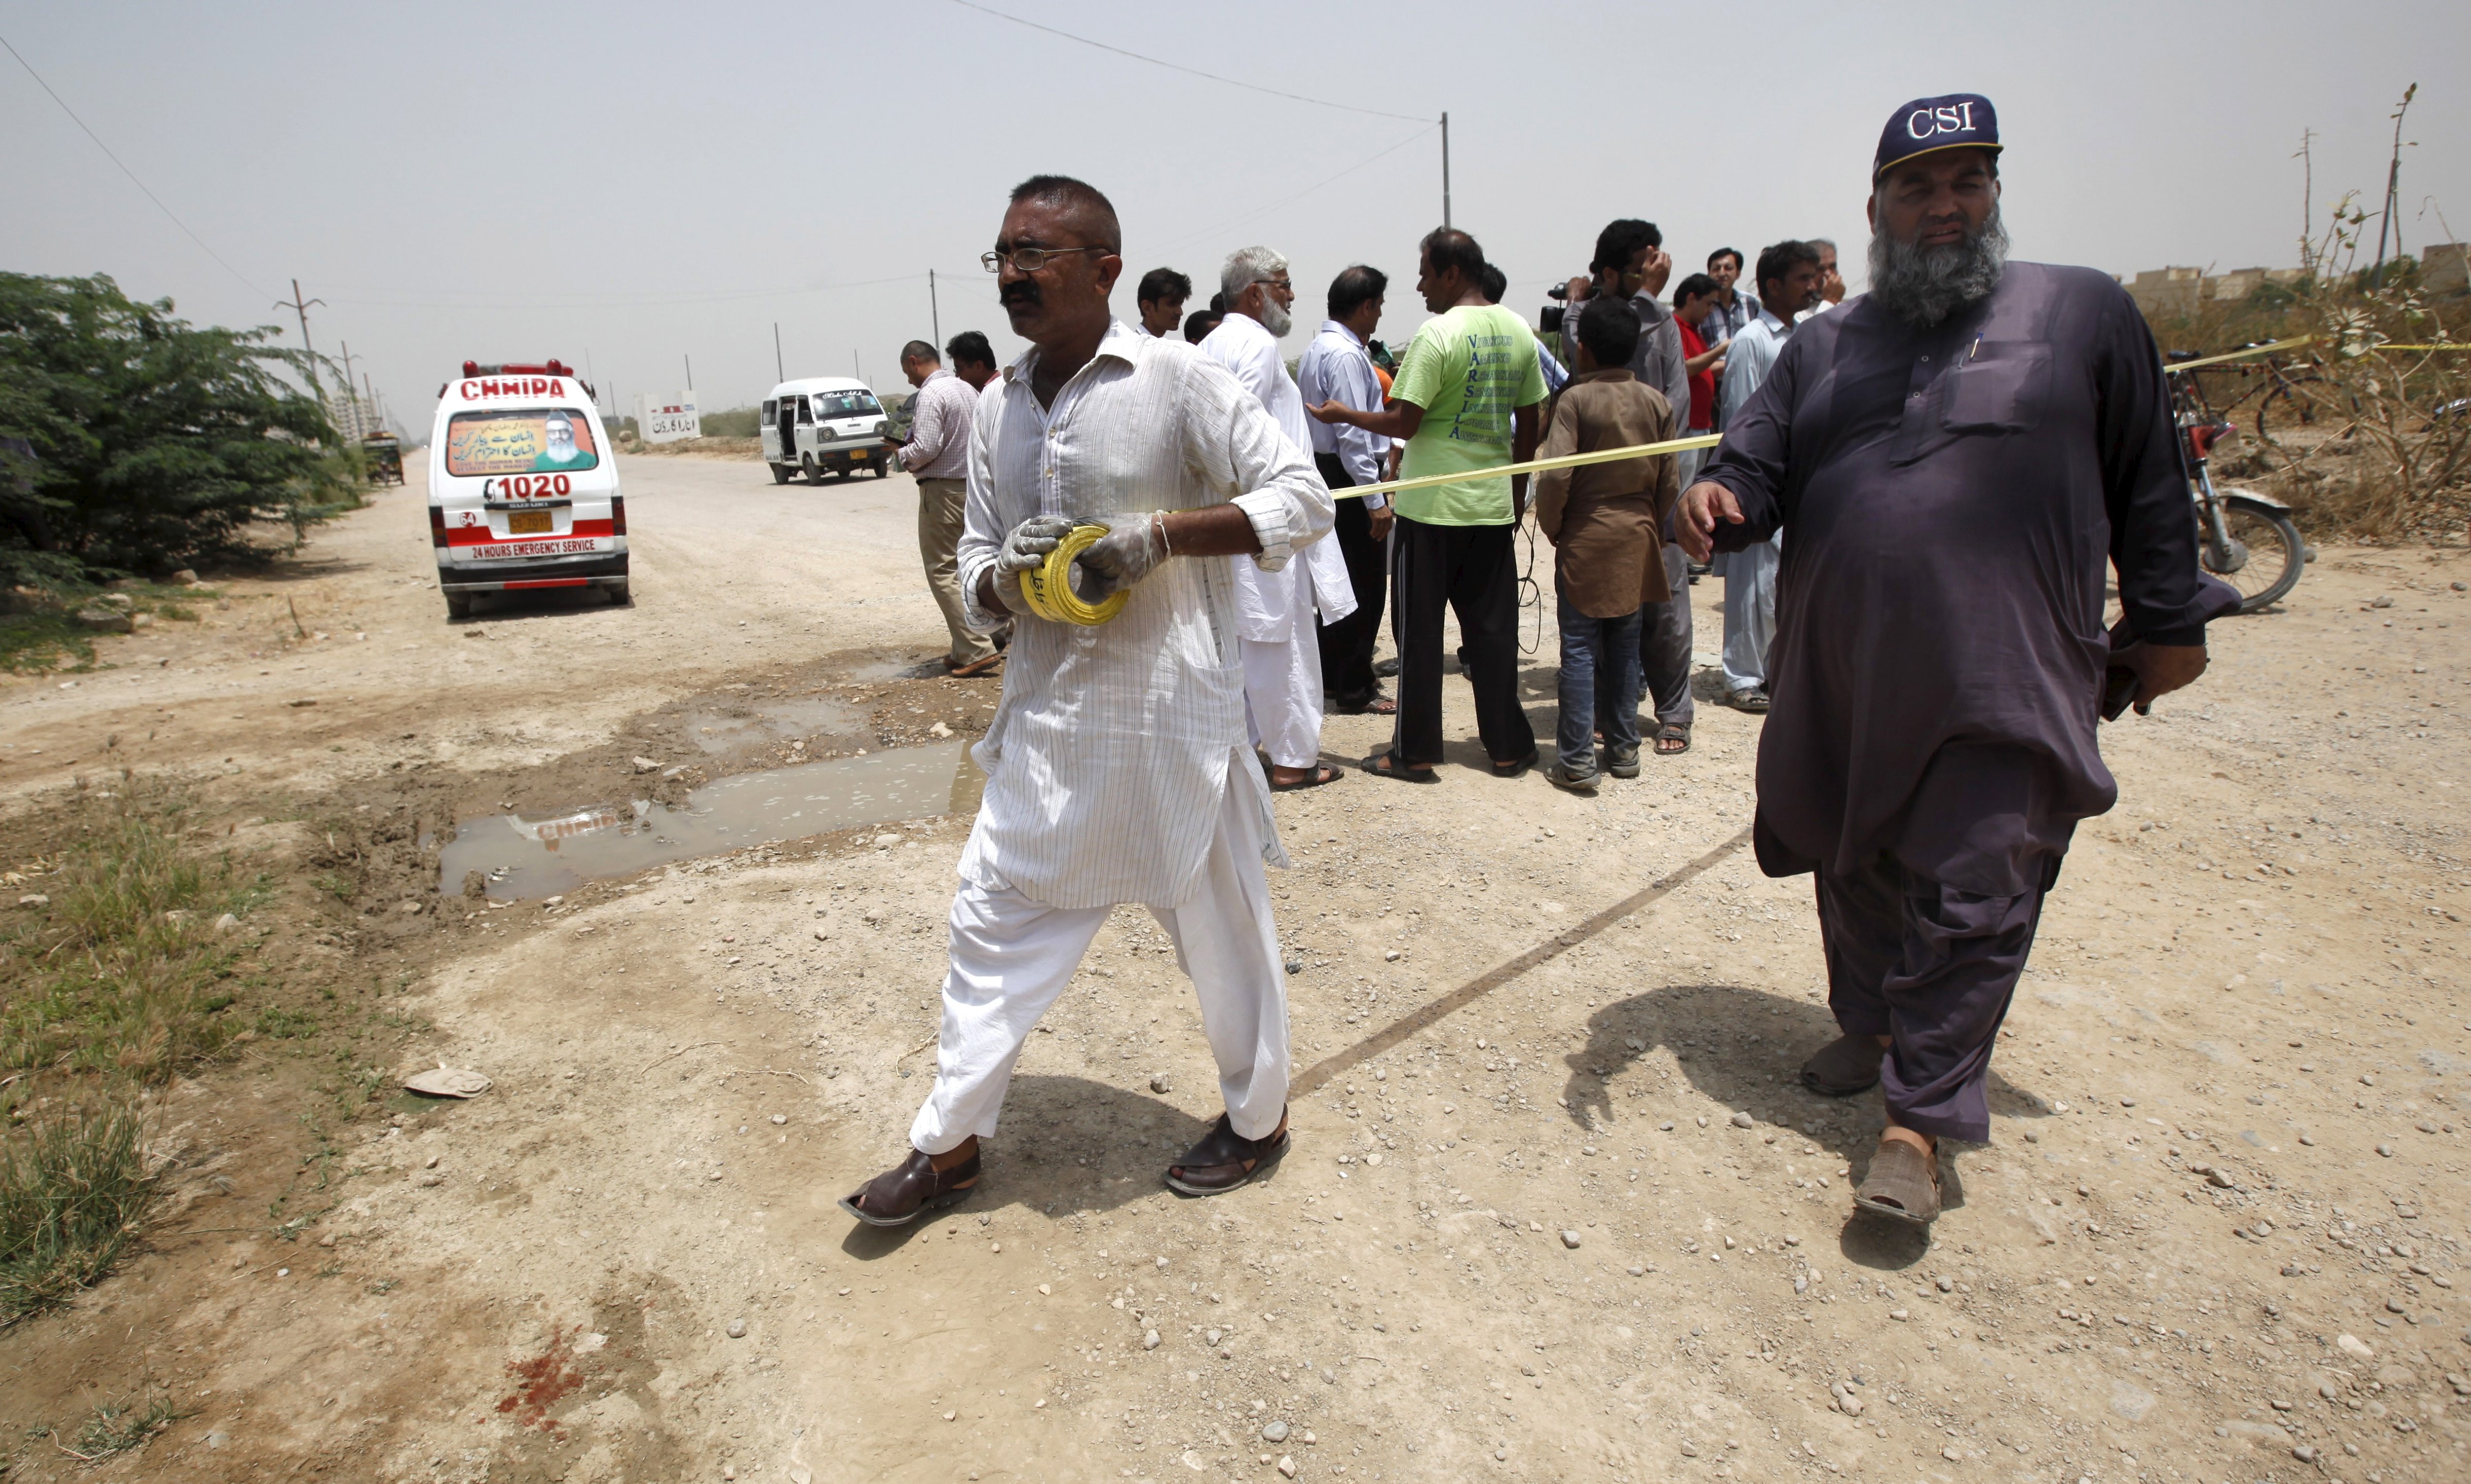 Security officials cordon off the area at the scene of an attack on a bus in Karachi